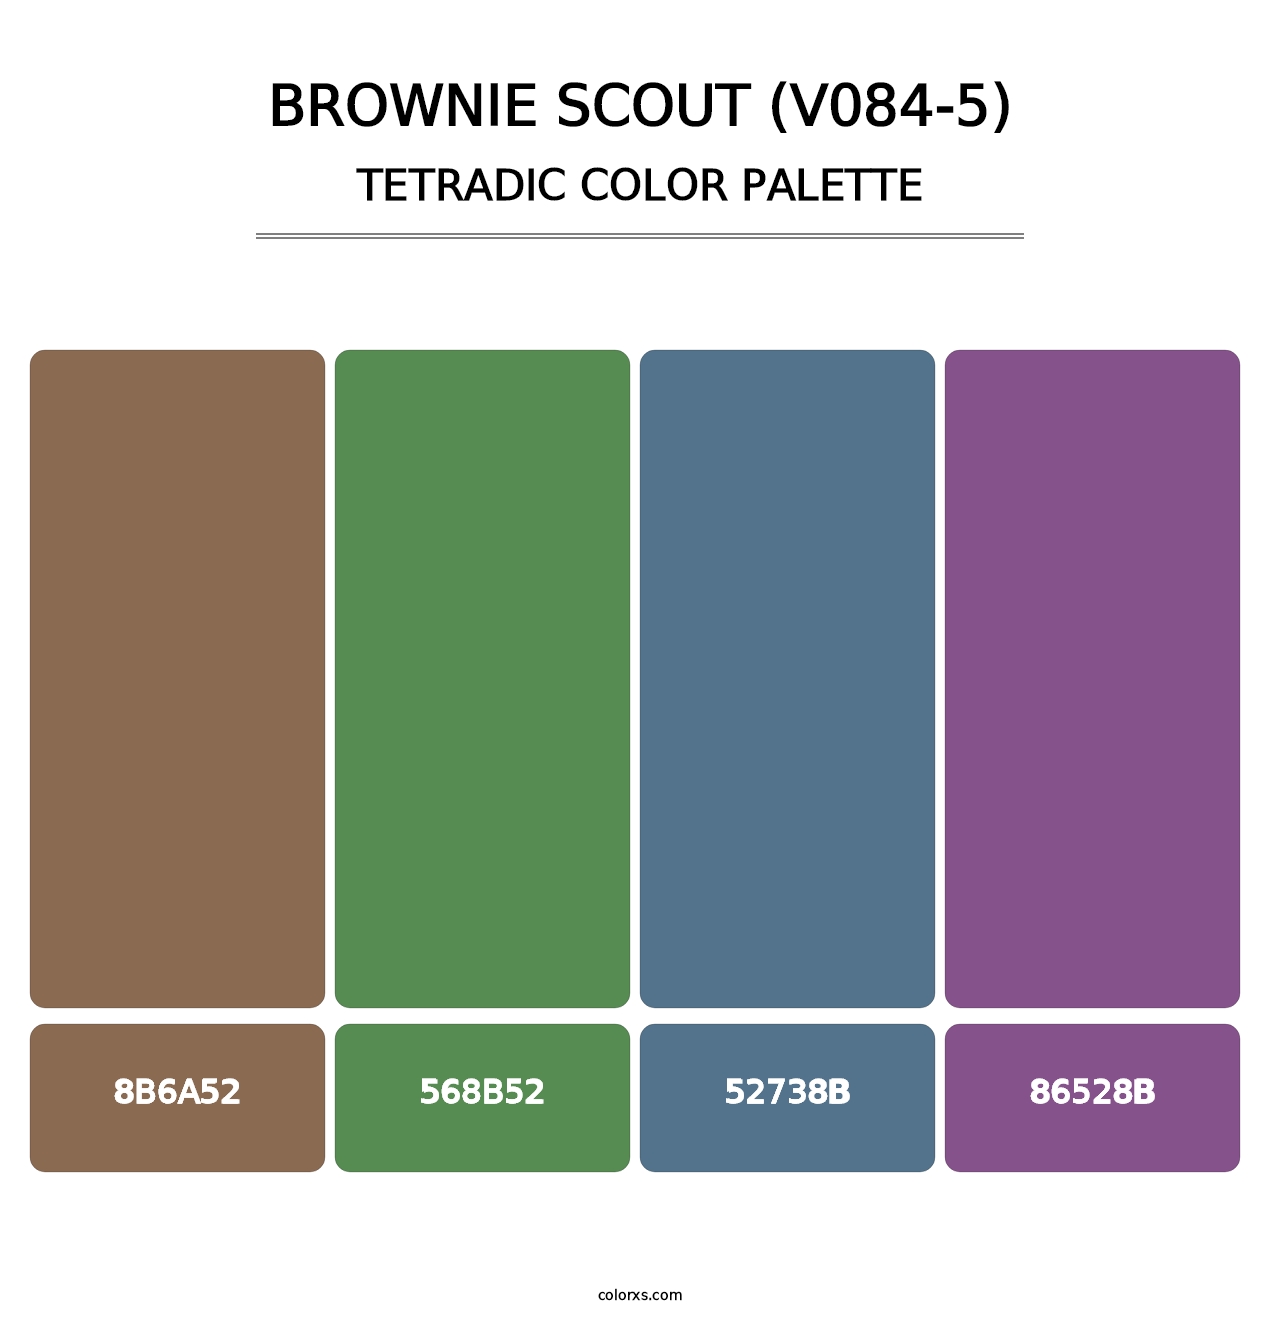 Brownie Scout (V084-5) - Tetradic Color Palette